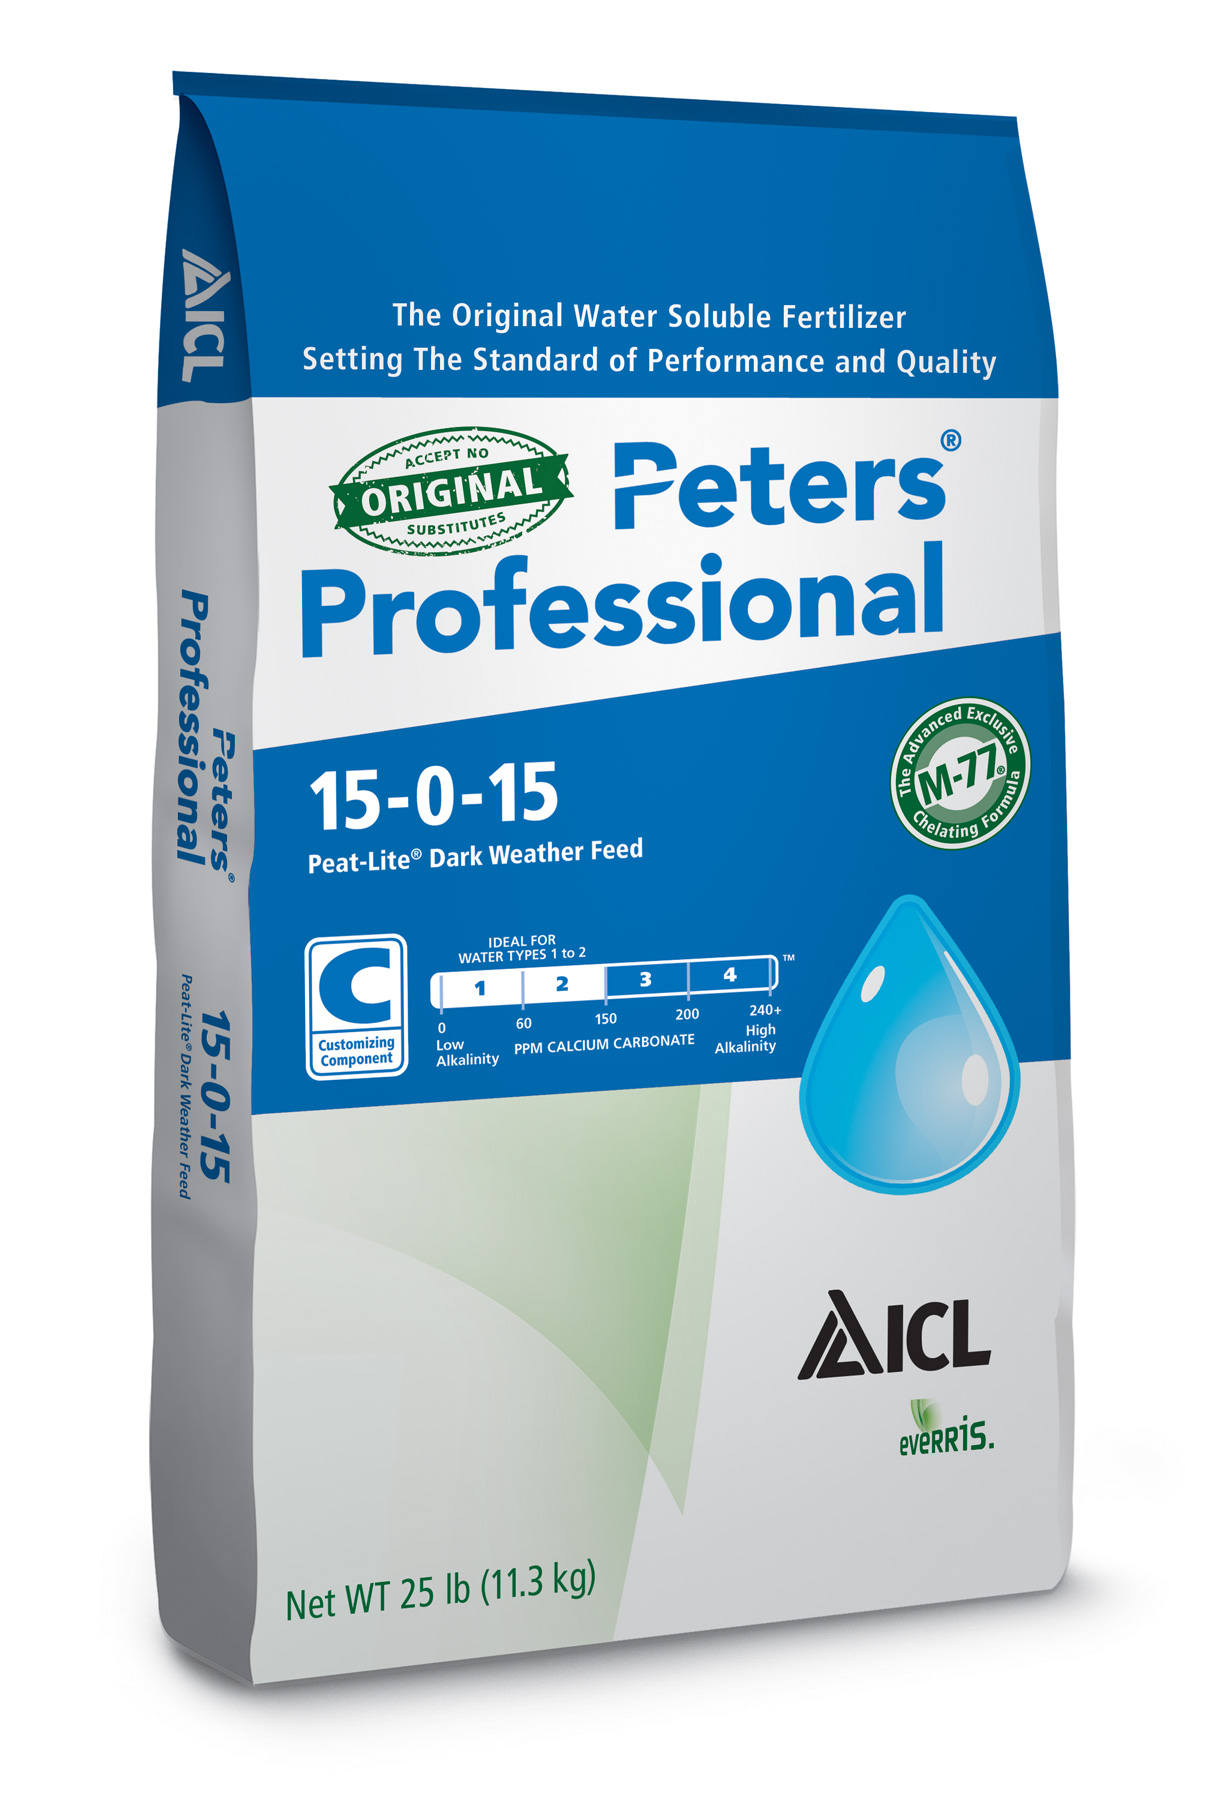 Peters Professional 15-0-15 Peat-Lite Dark Weather Special 25 lb Bag - Water Soluble Fertilizer